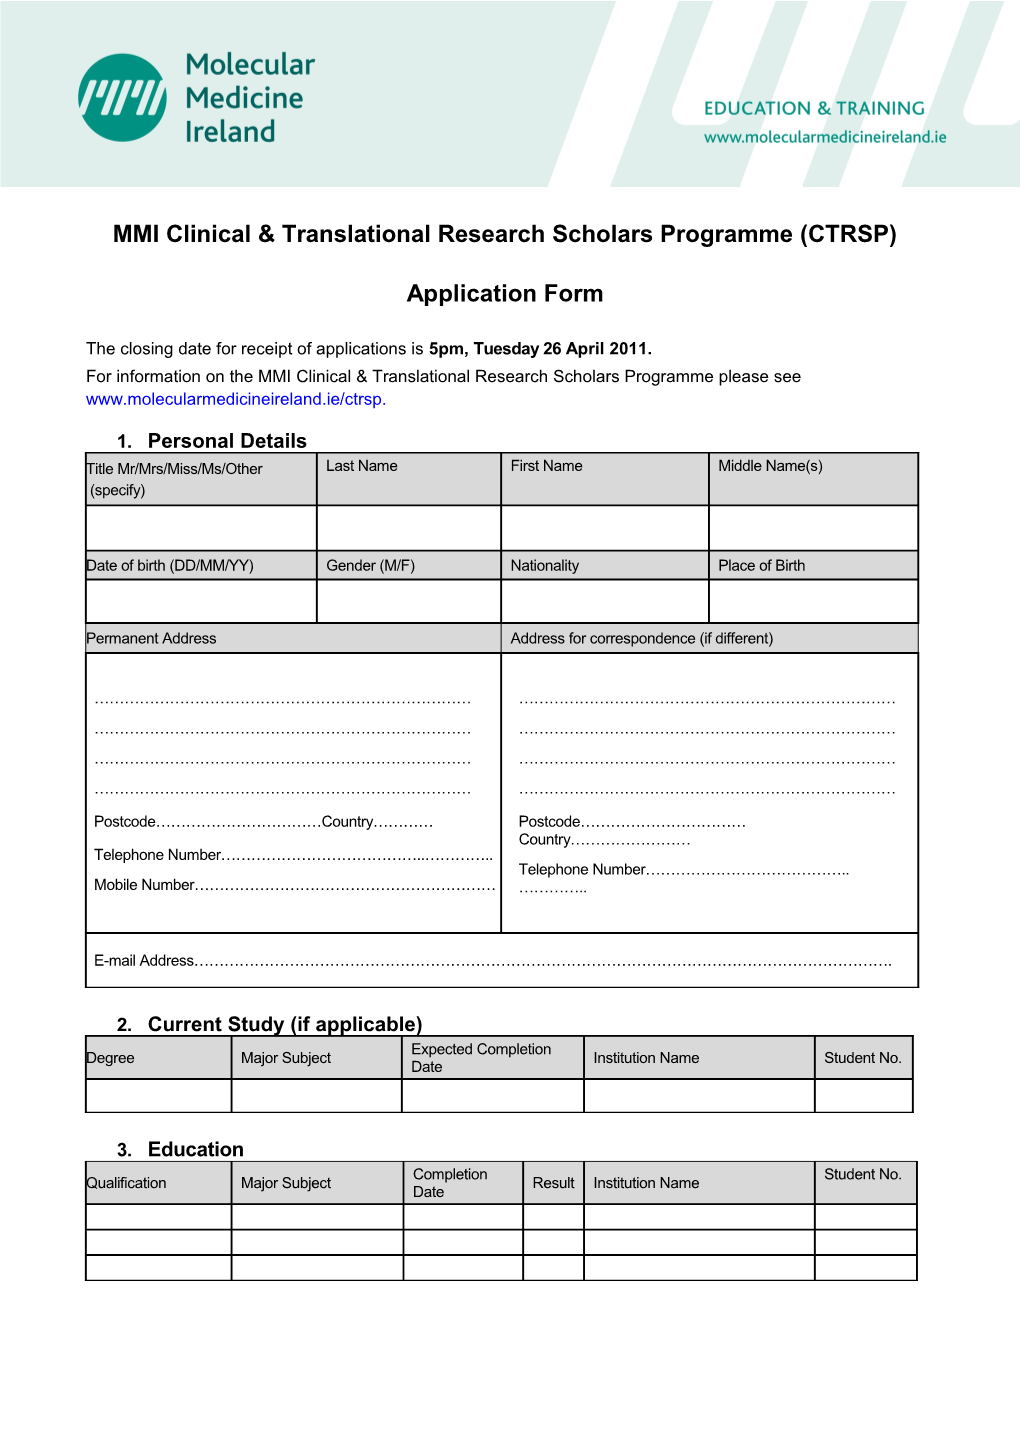 MMI Clinical & Translational Research Scholars Programme (CTRSP)